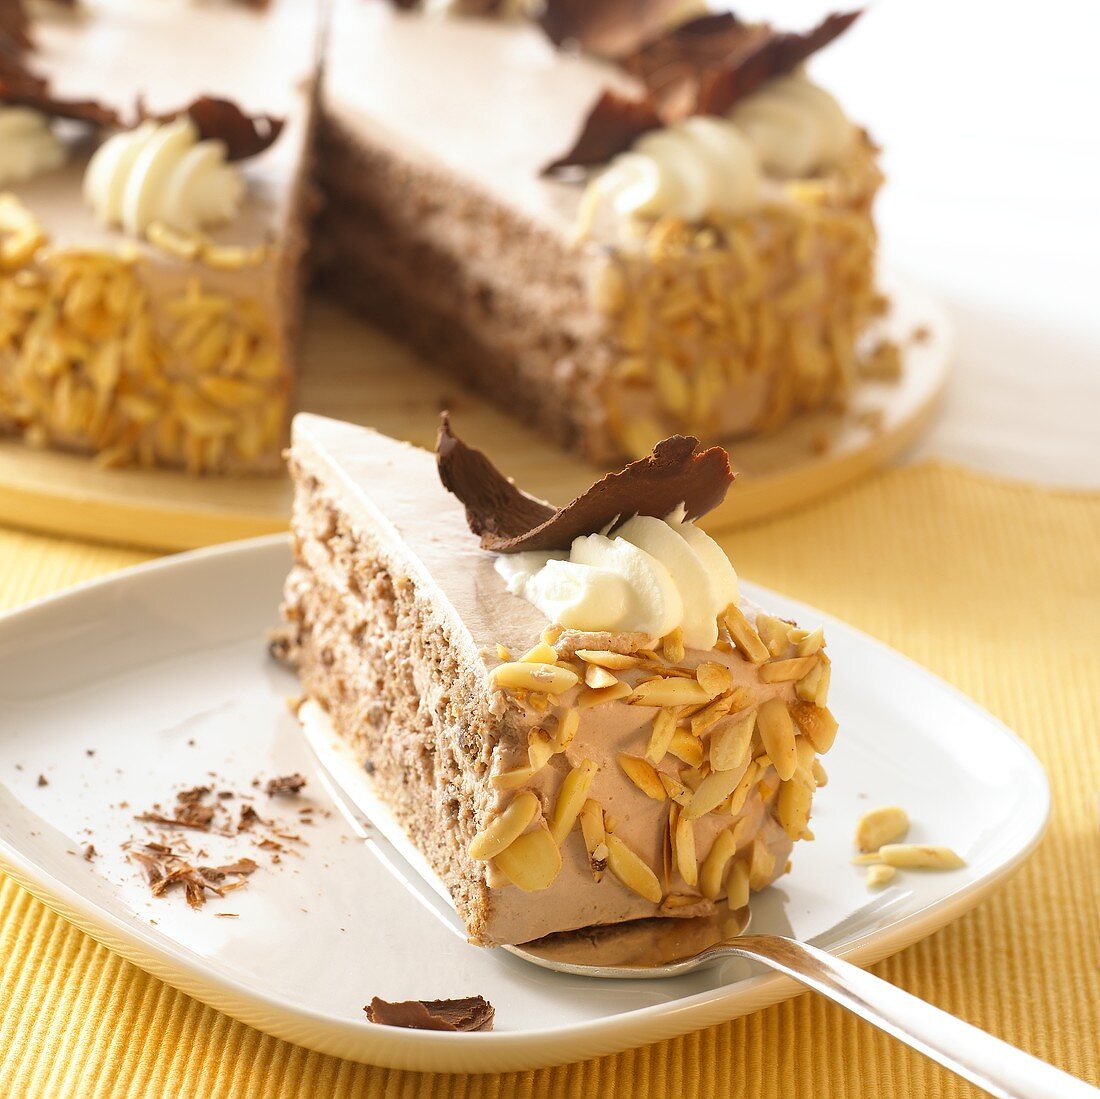 Whiskey and cream gateau with almonds and chocolate curls